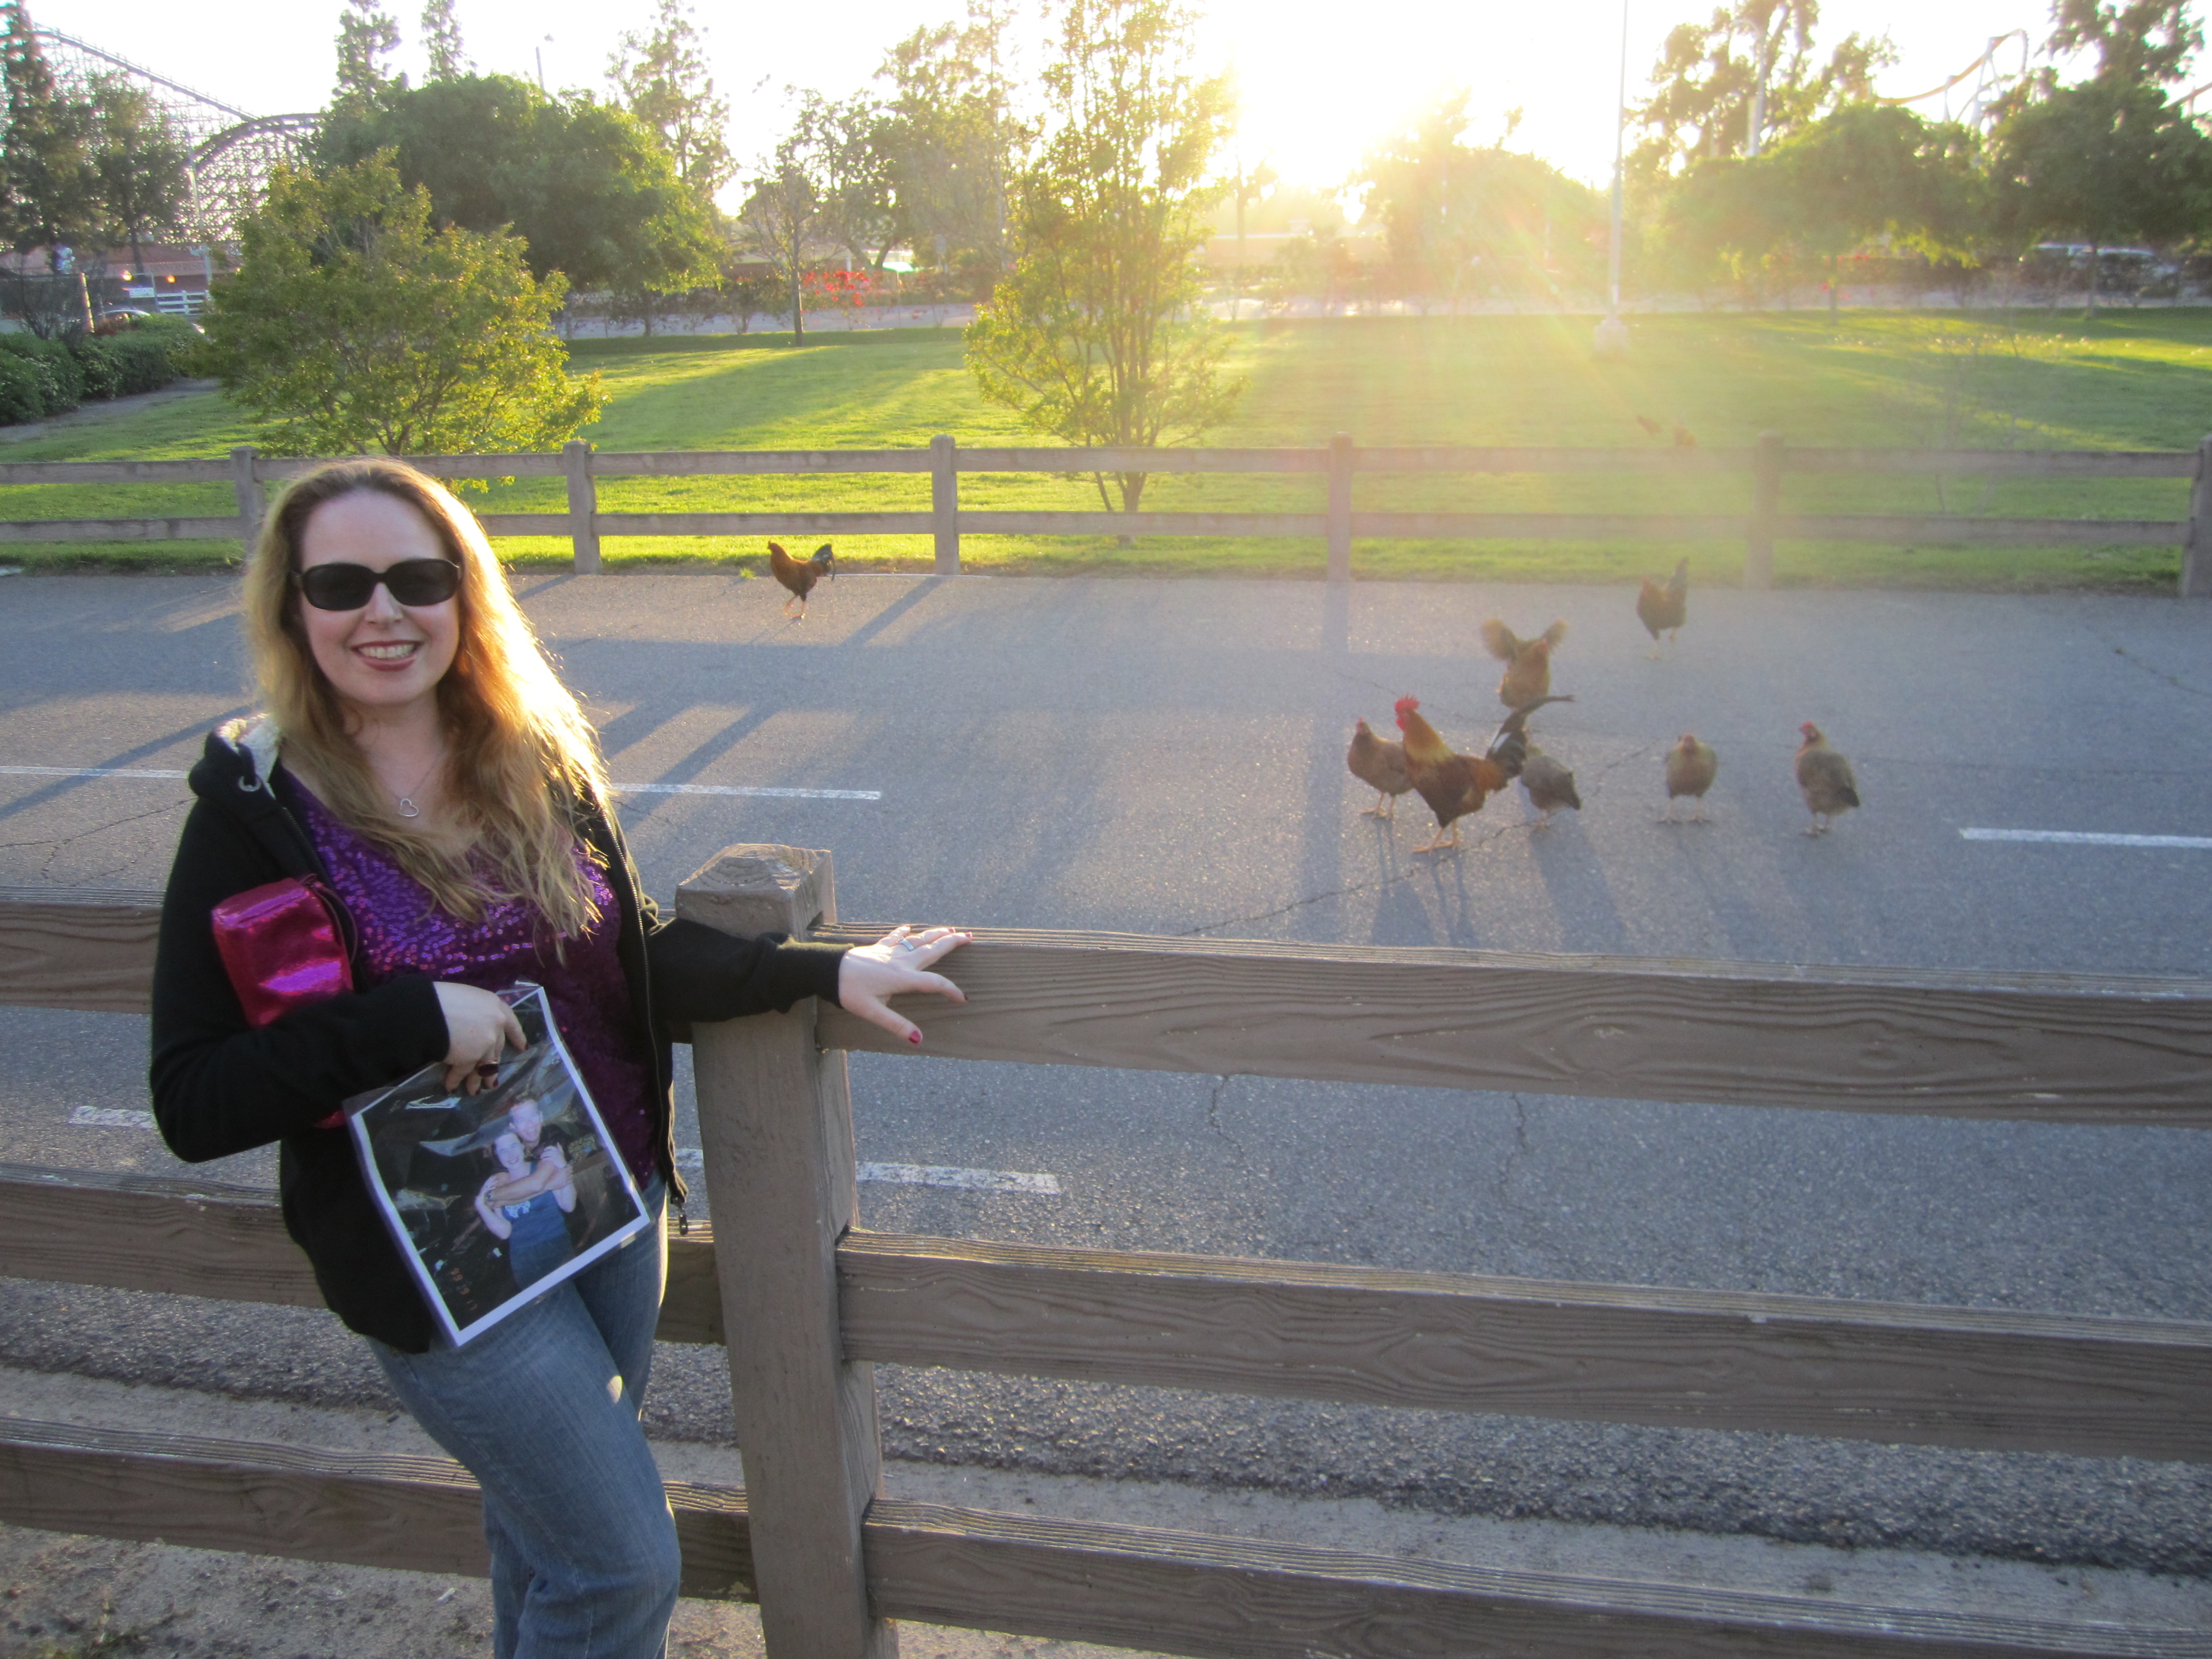 dani-with-chickens-at-park-knotts-berry-farm-7-ways-to-purchase-a-discount-ticket.jpg